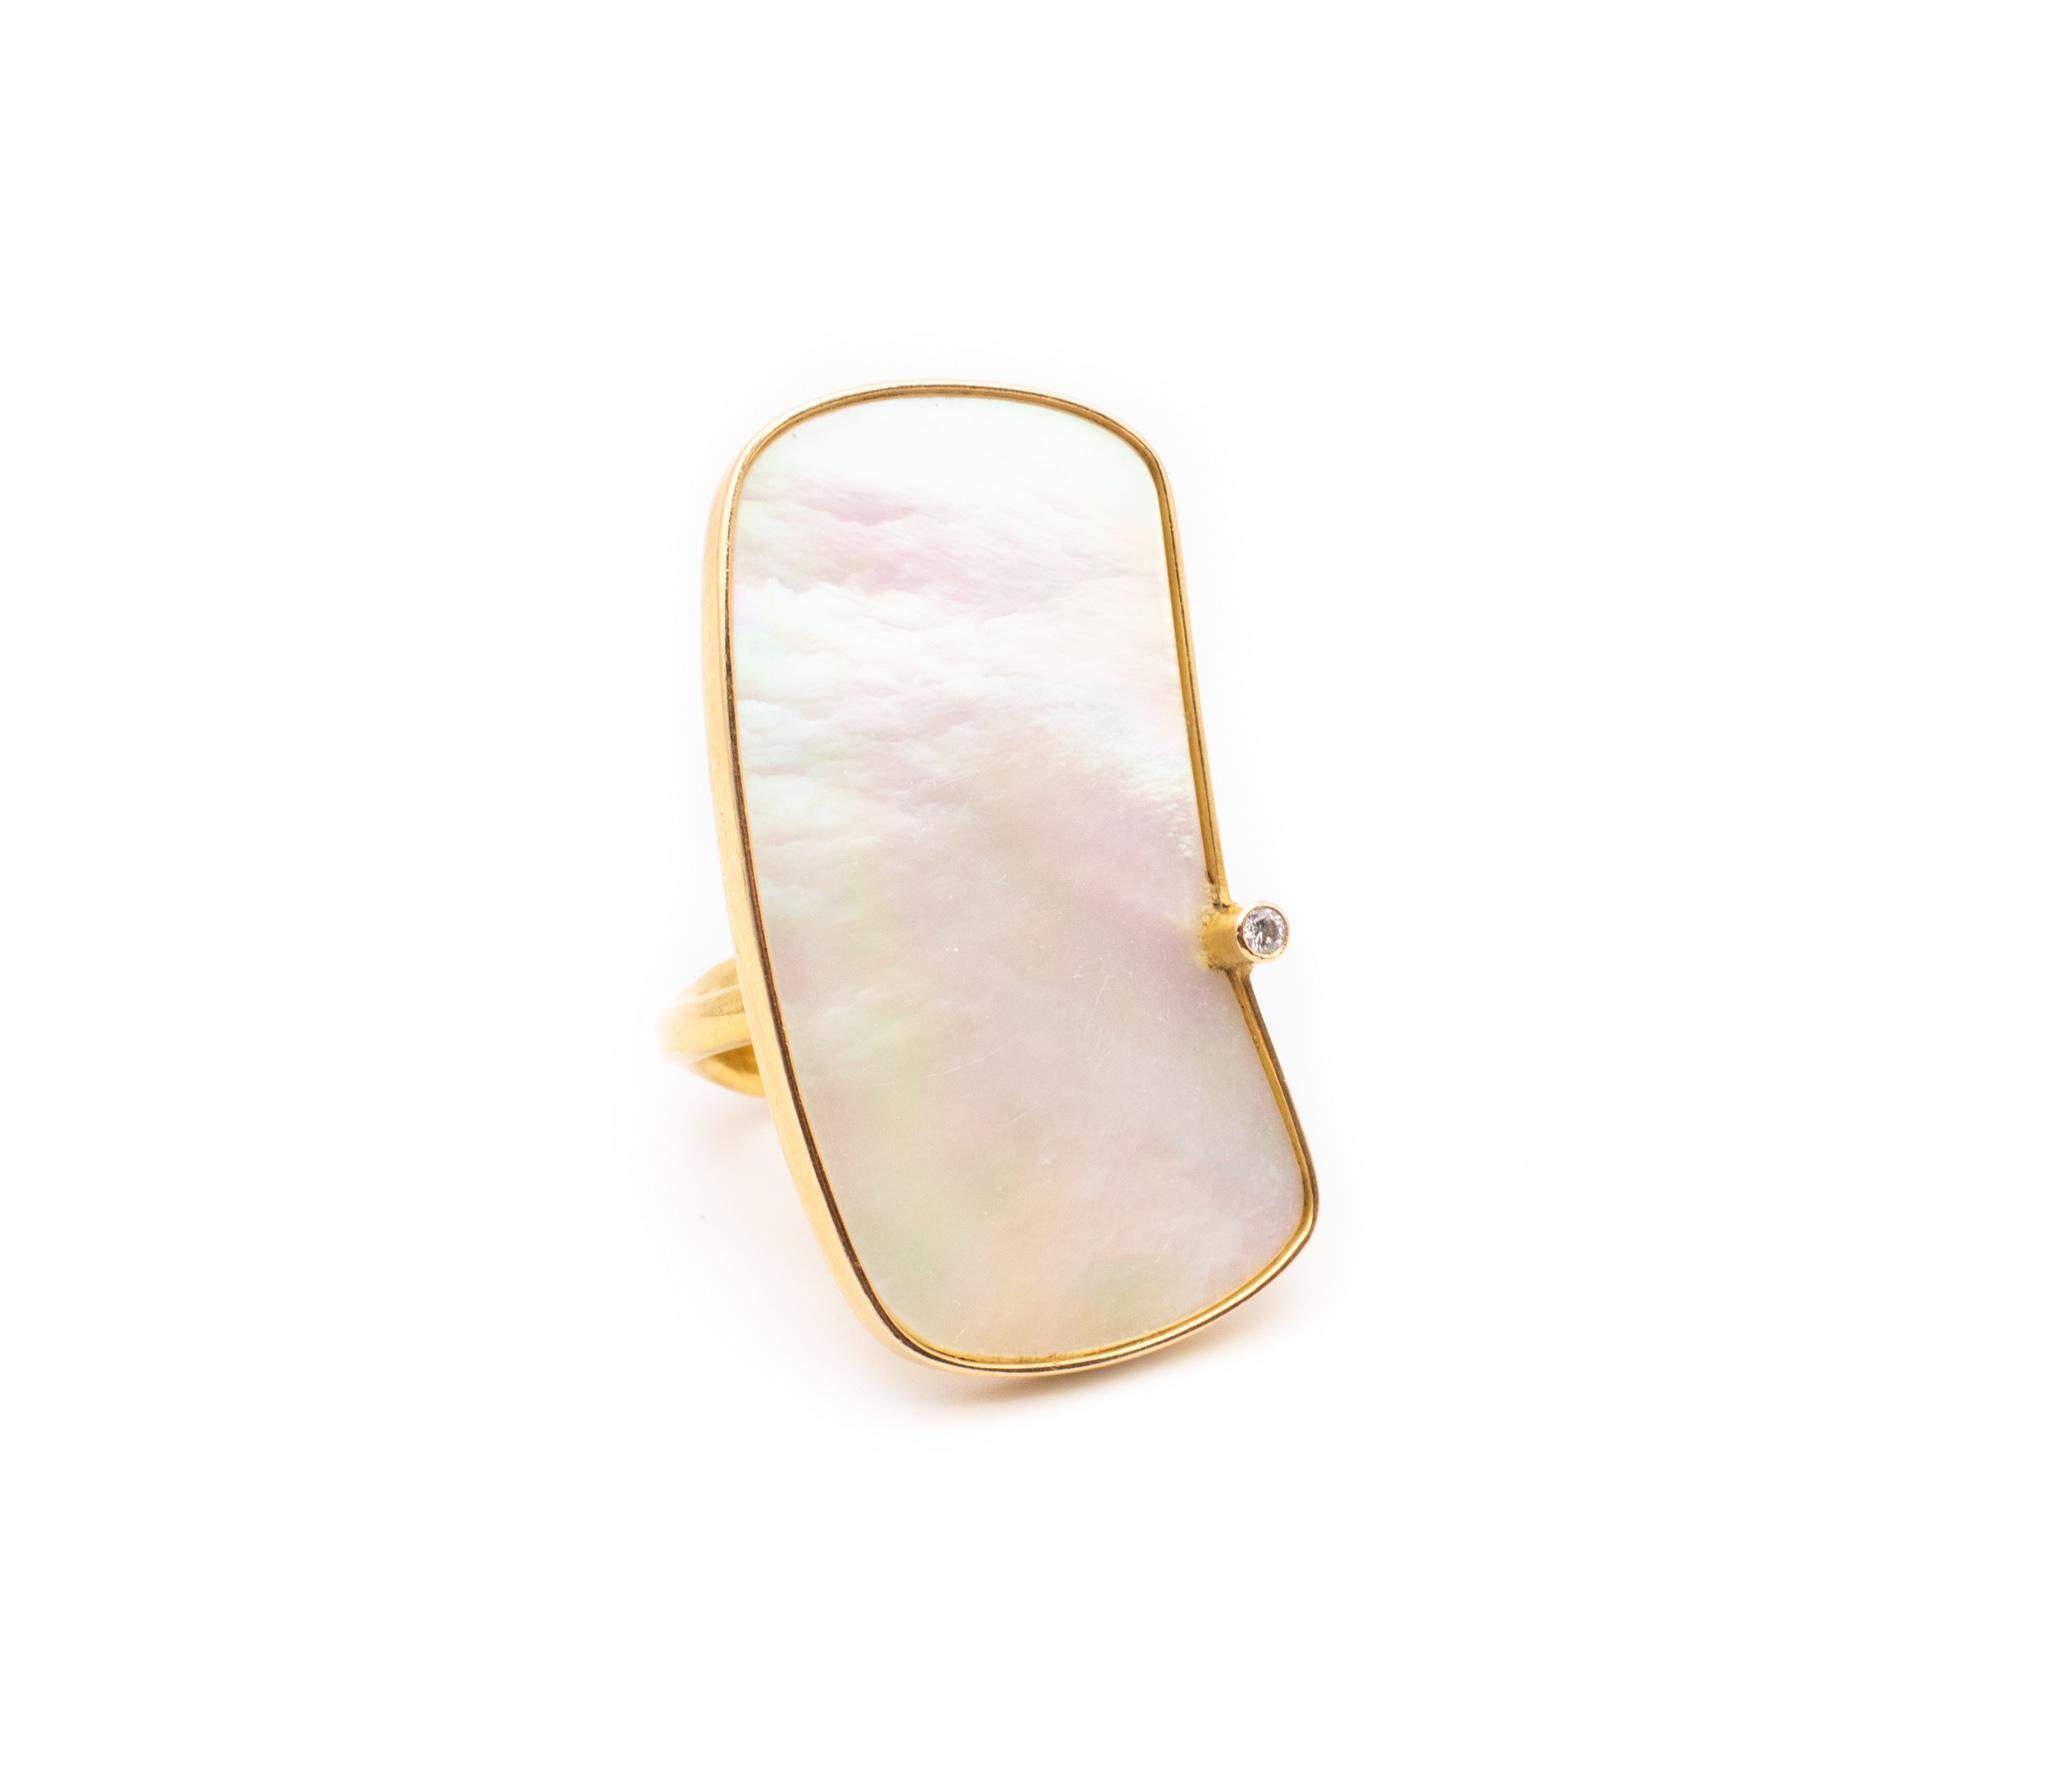 Sculptural ring designed by Karl-Heinz Reister, (b-1941).

A one-of-a-kind piece created by Karl-Heinz Reister in Milan Italy, back in the 2001. It was totally crafted in solid yellow gold of 18 karats, with high polished and hammered finish.

The